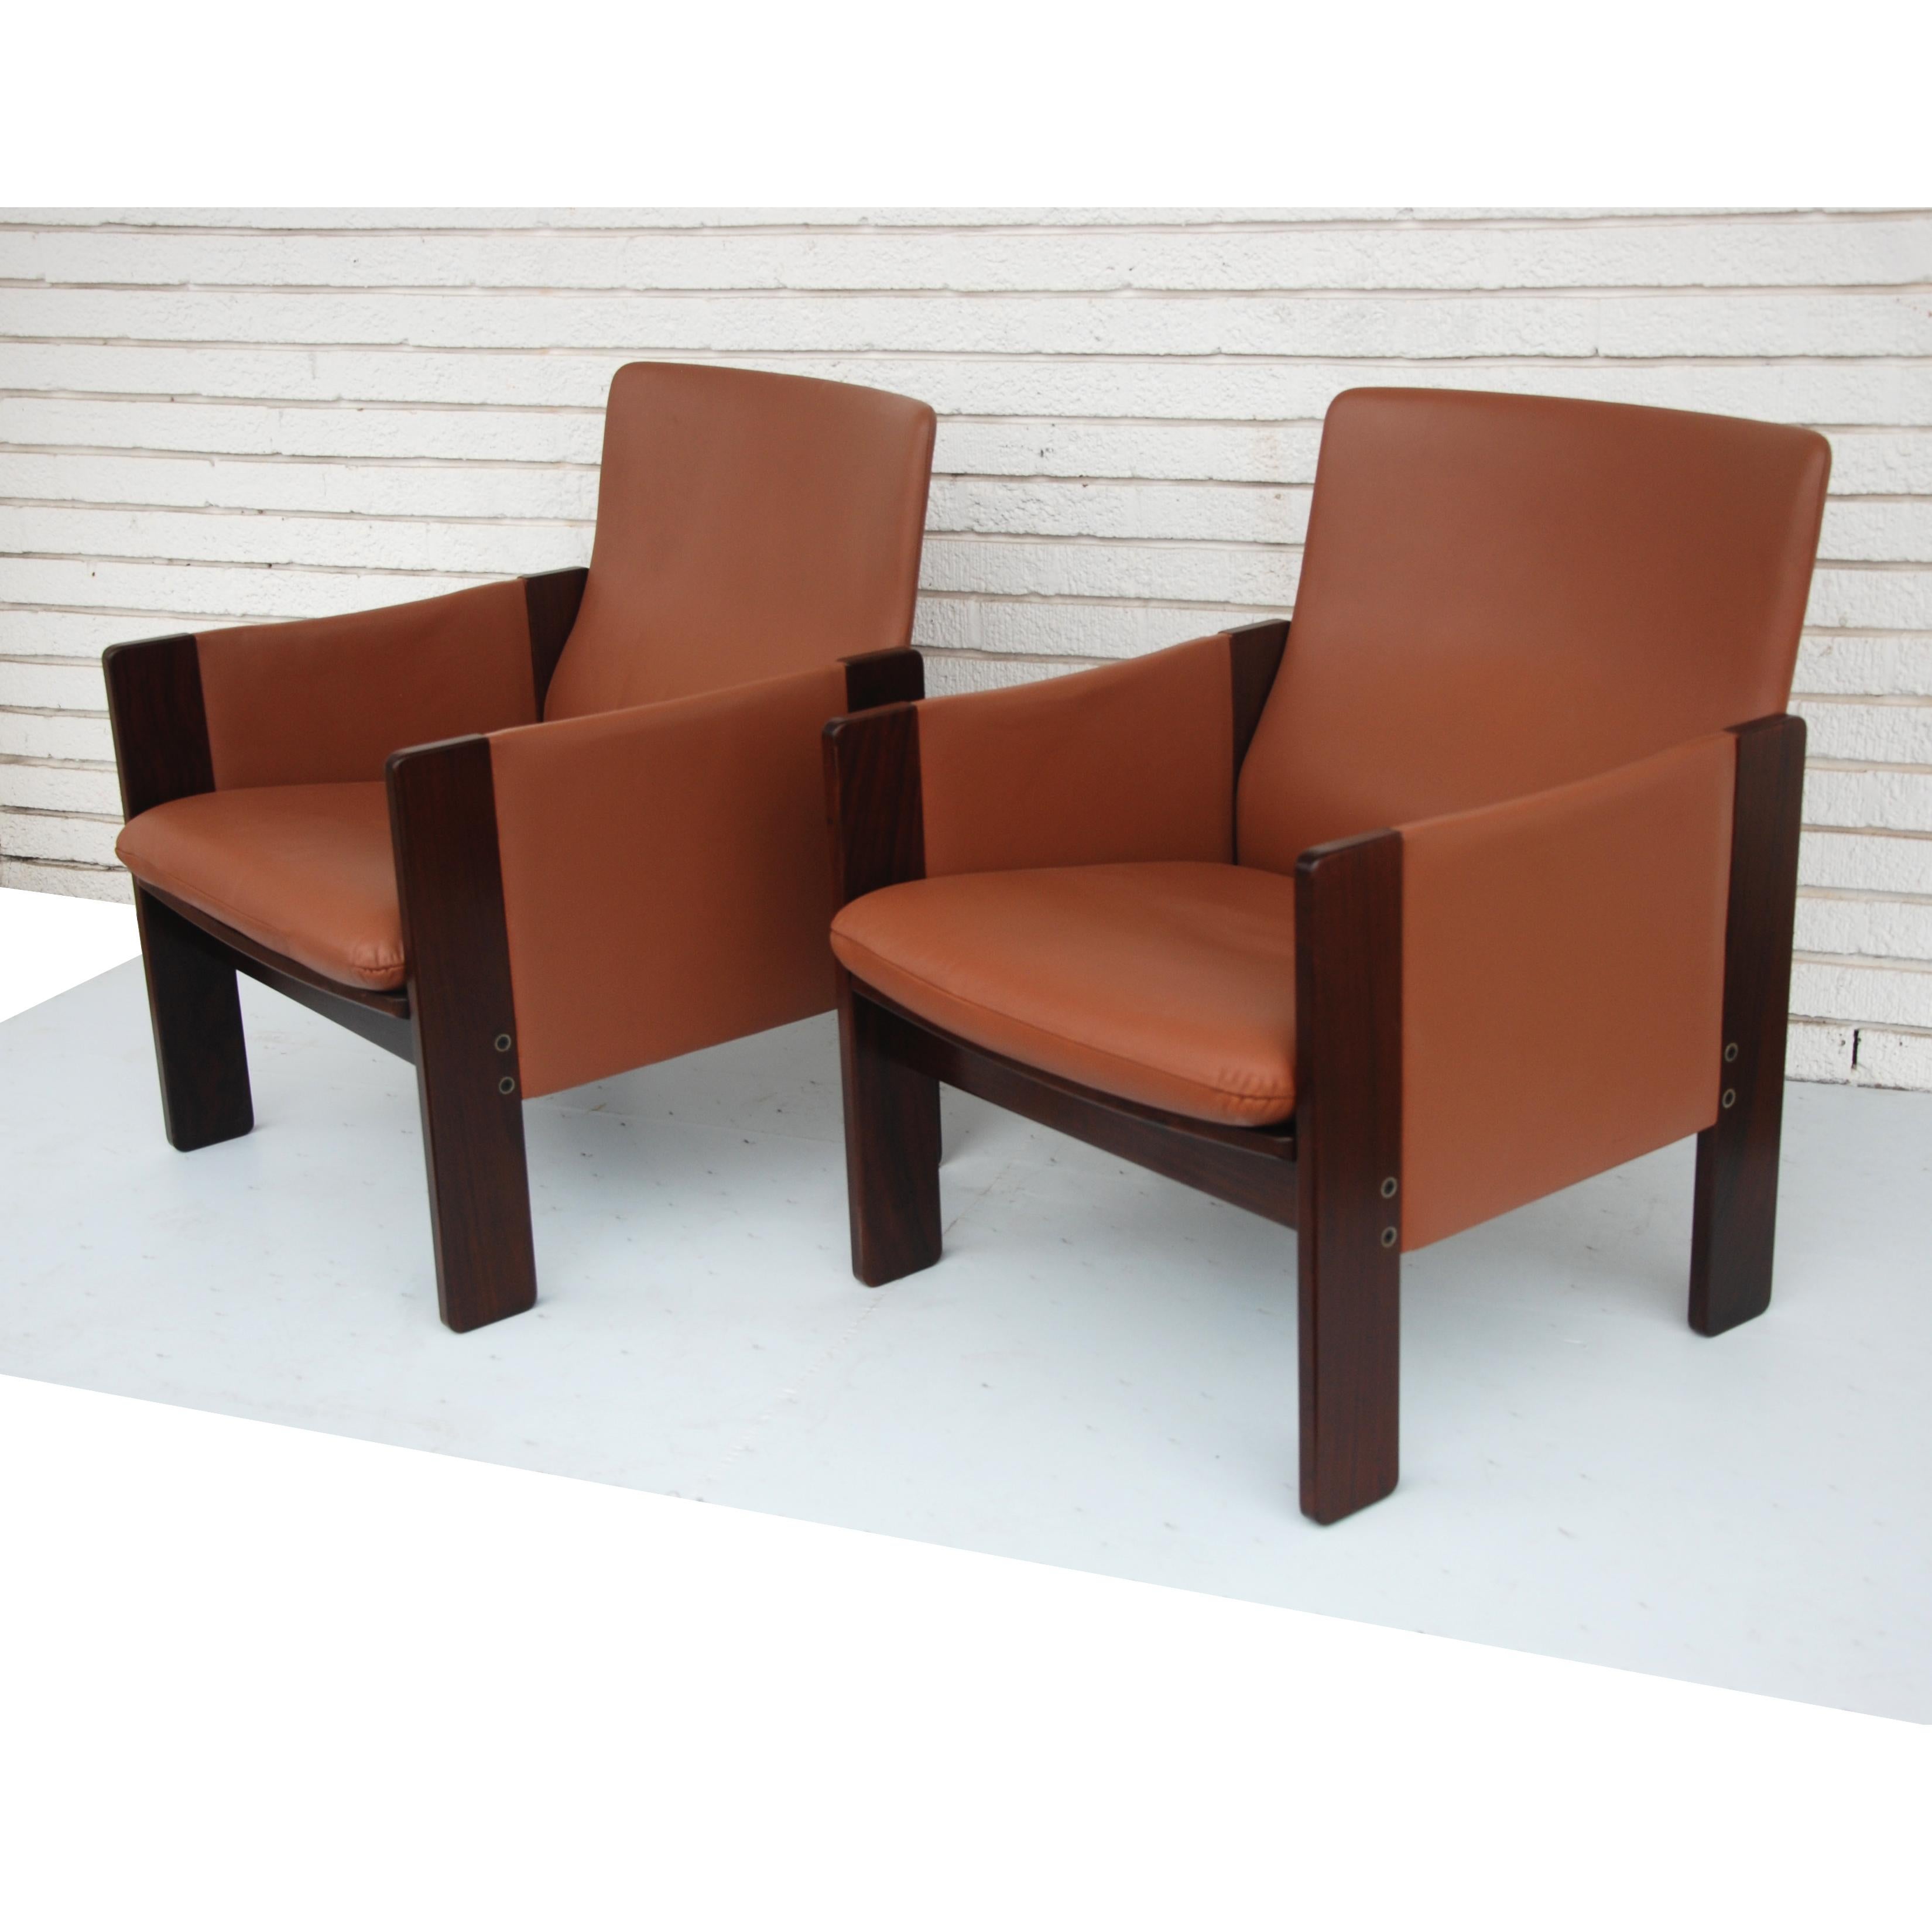 A pair of Mid-Century Modern lounge chairs designed by Tobia Scarpa and made by Cassina. Rosewood frames with leather upholstery.